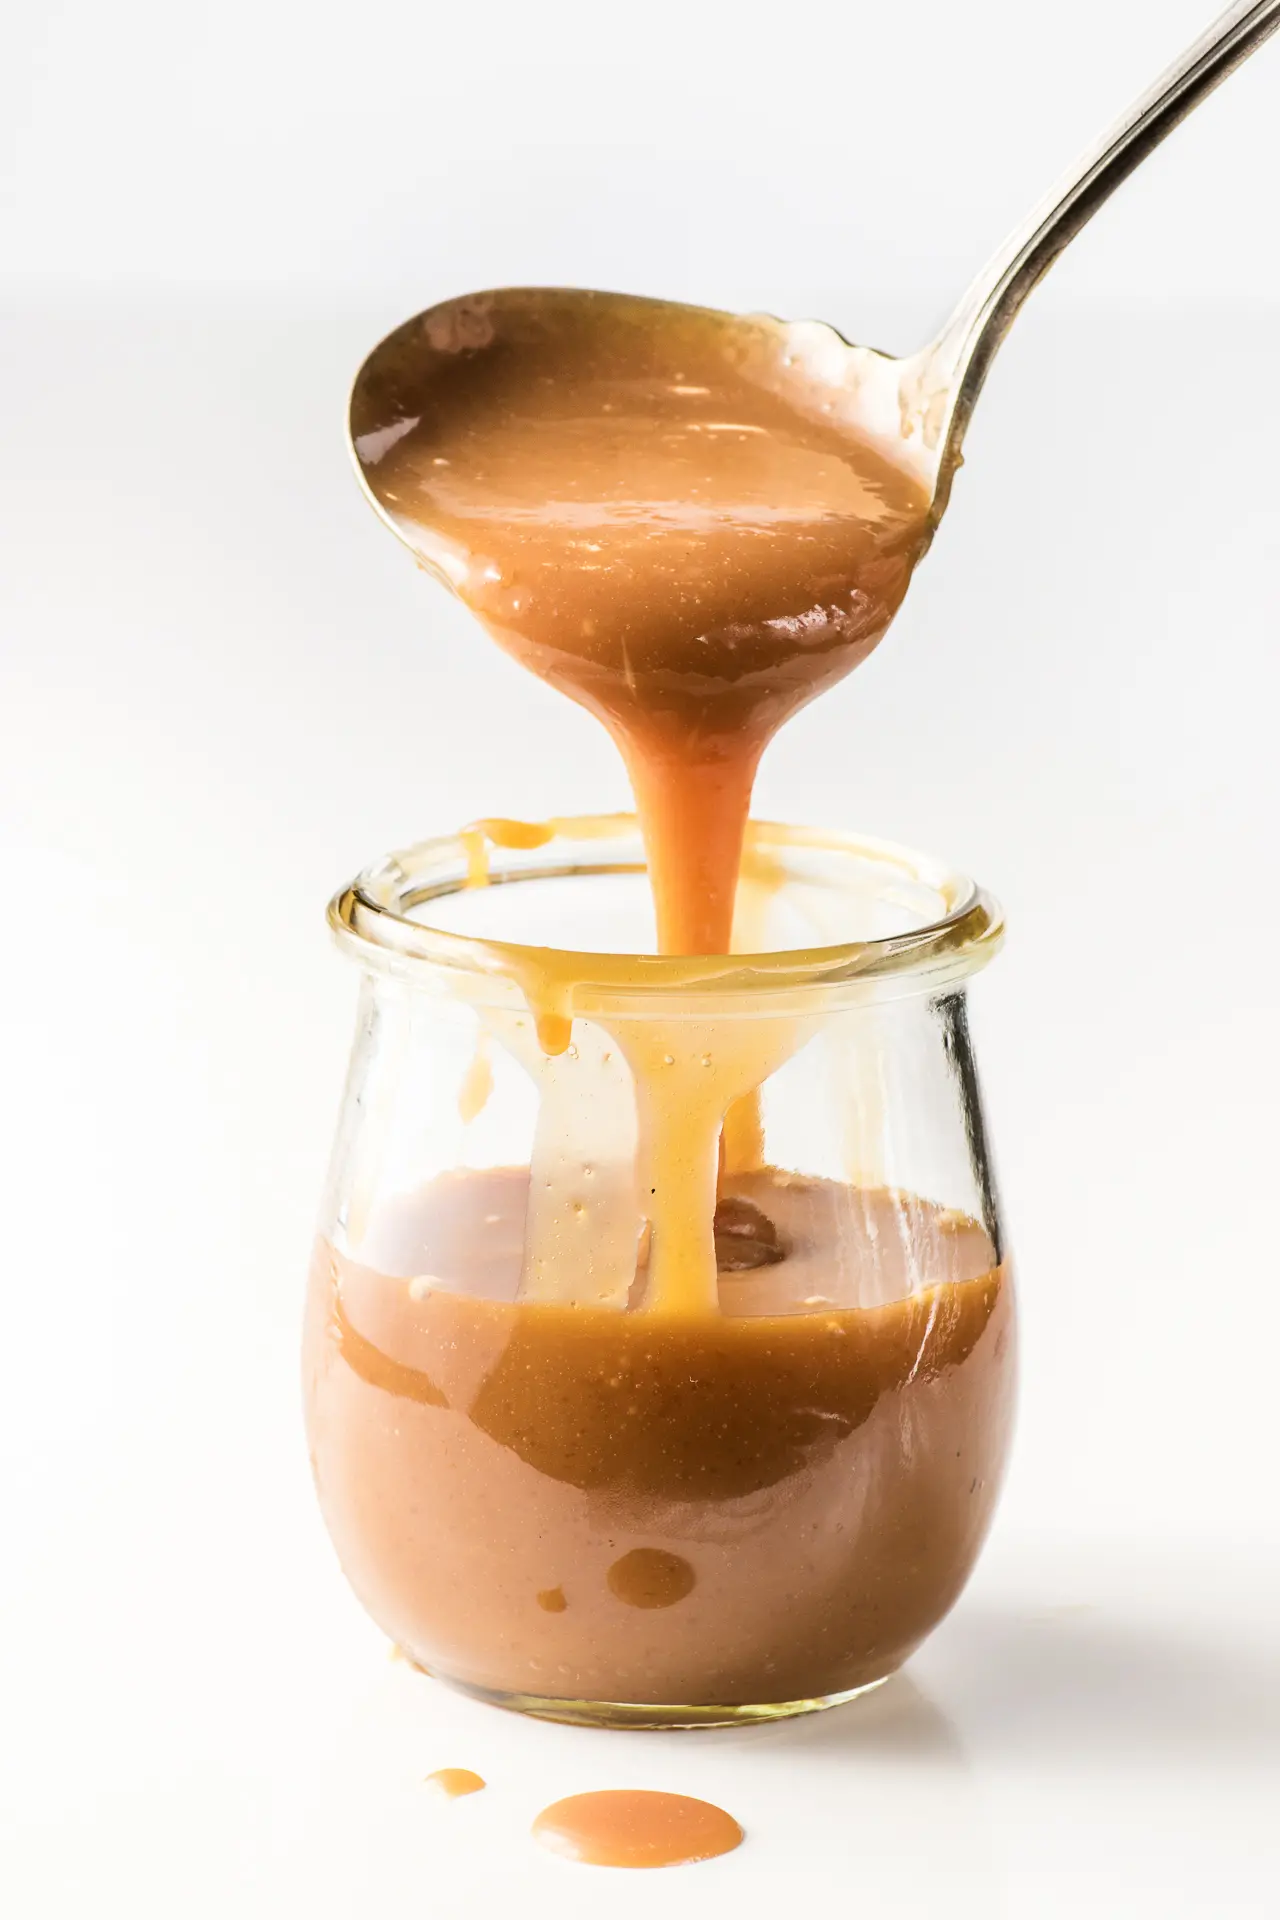 A small jar of keto caramel sauce. Caramel is being scooped out with a mini ladle.